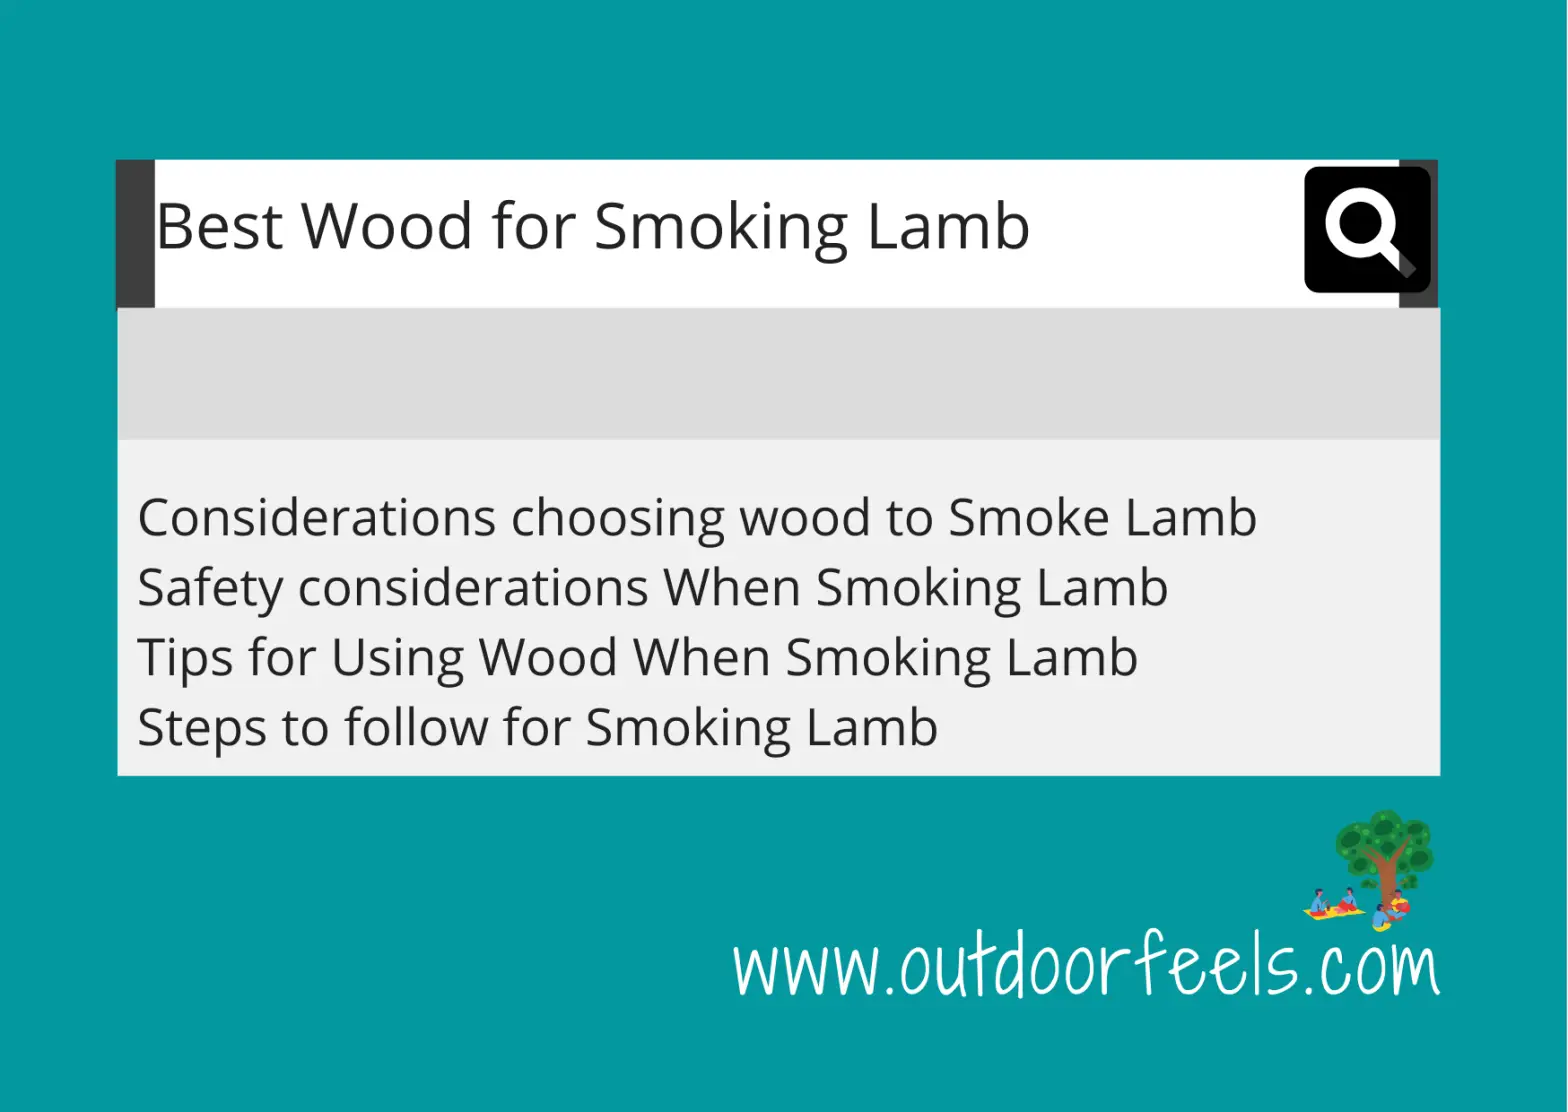 Best Wood for Smoking Lamb